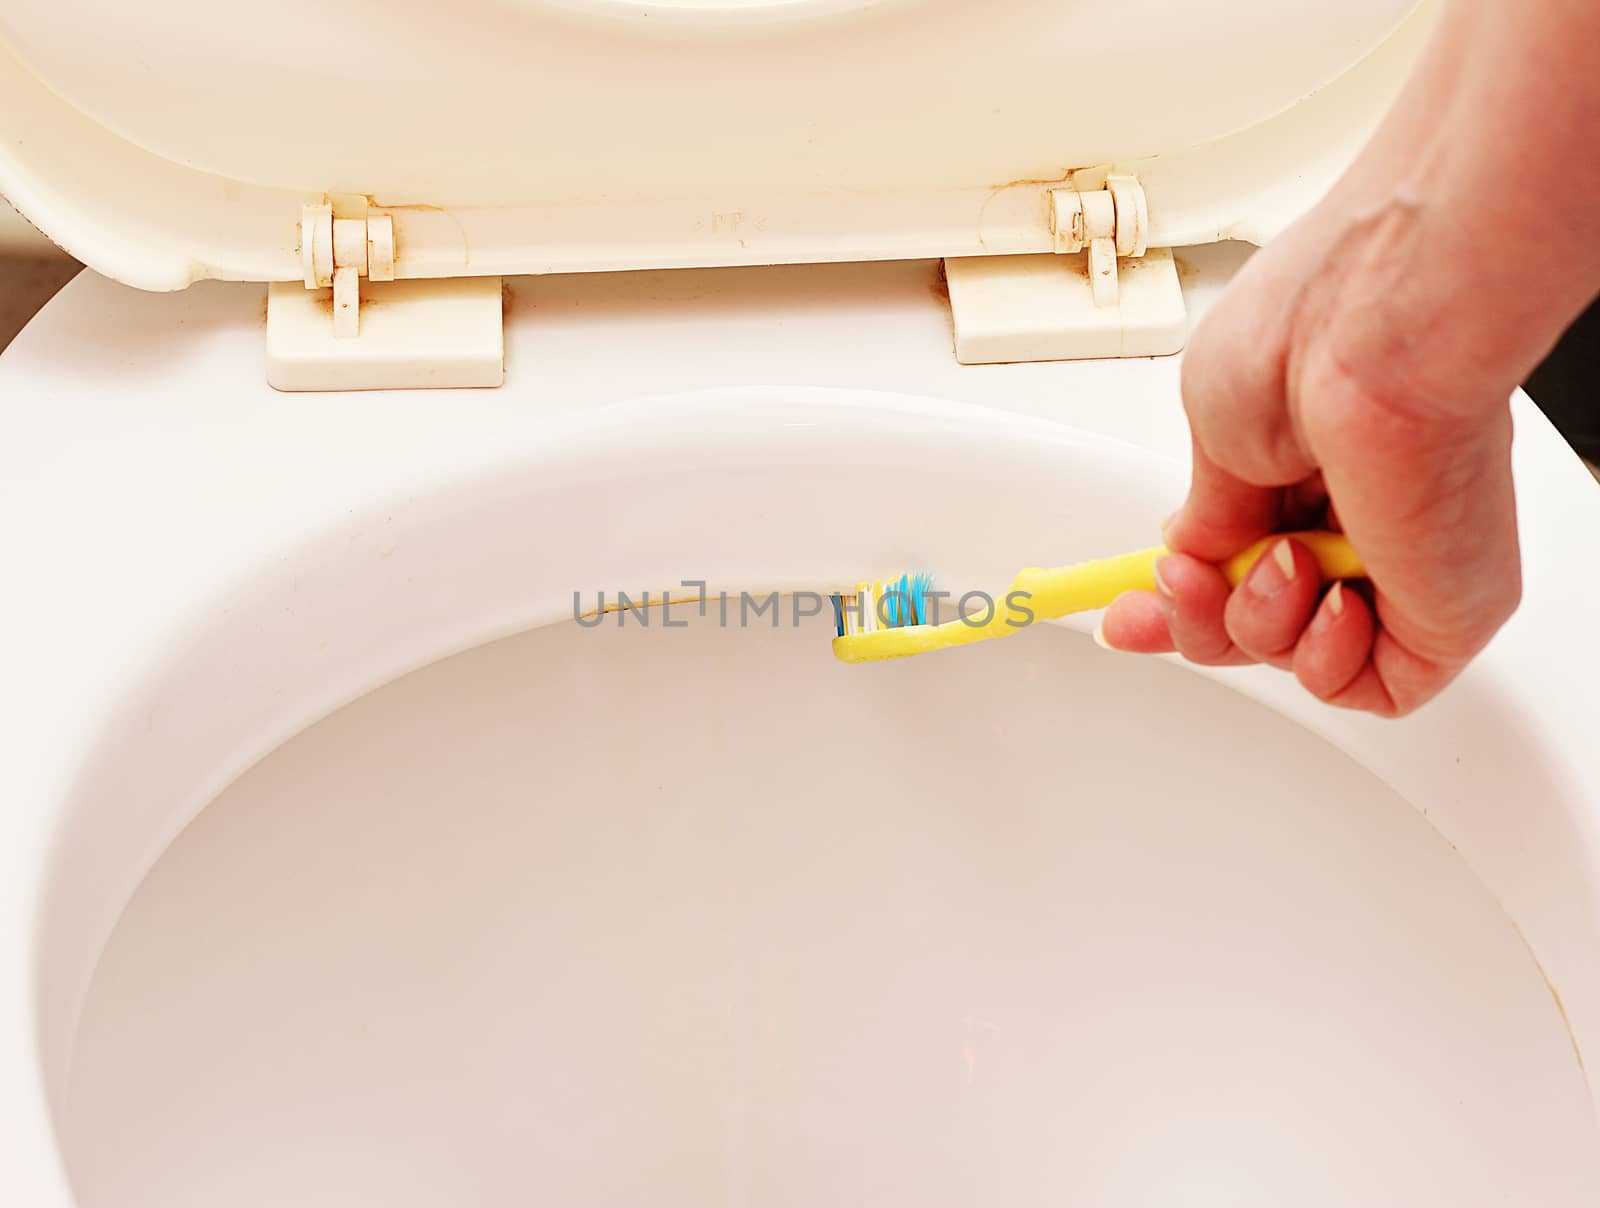 Thorough cleaning toilets use a toothbrush. by andsst